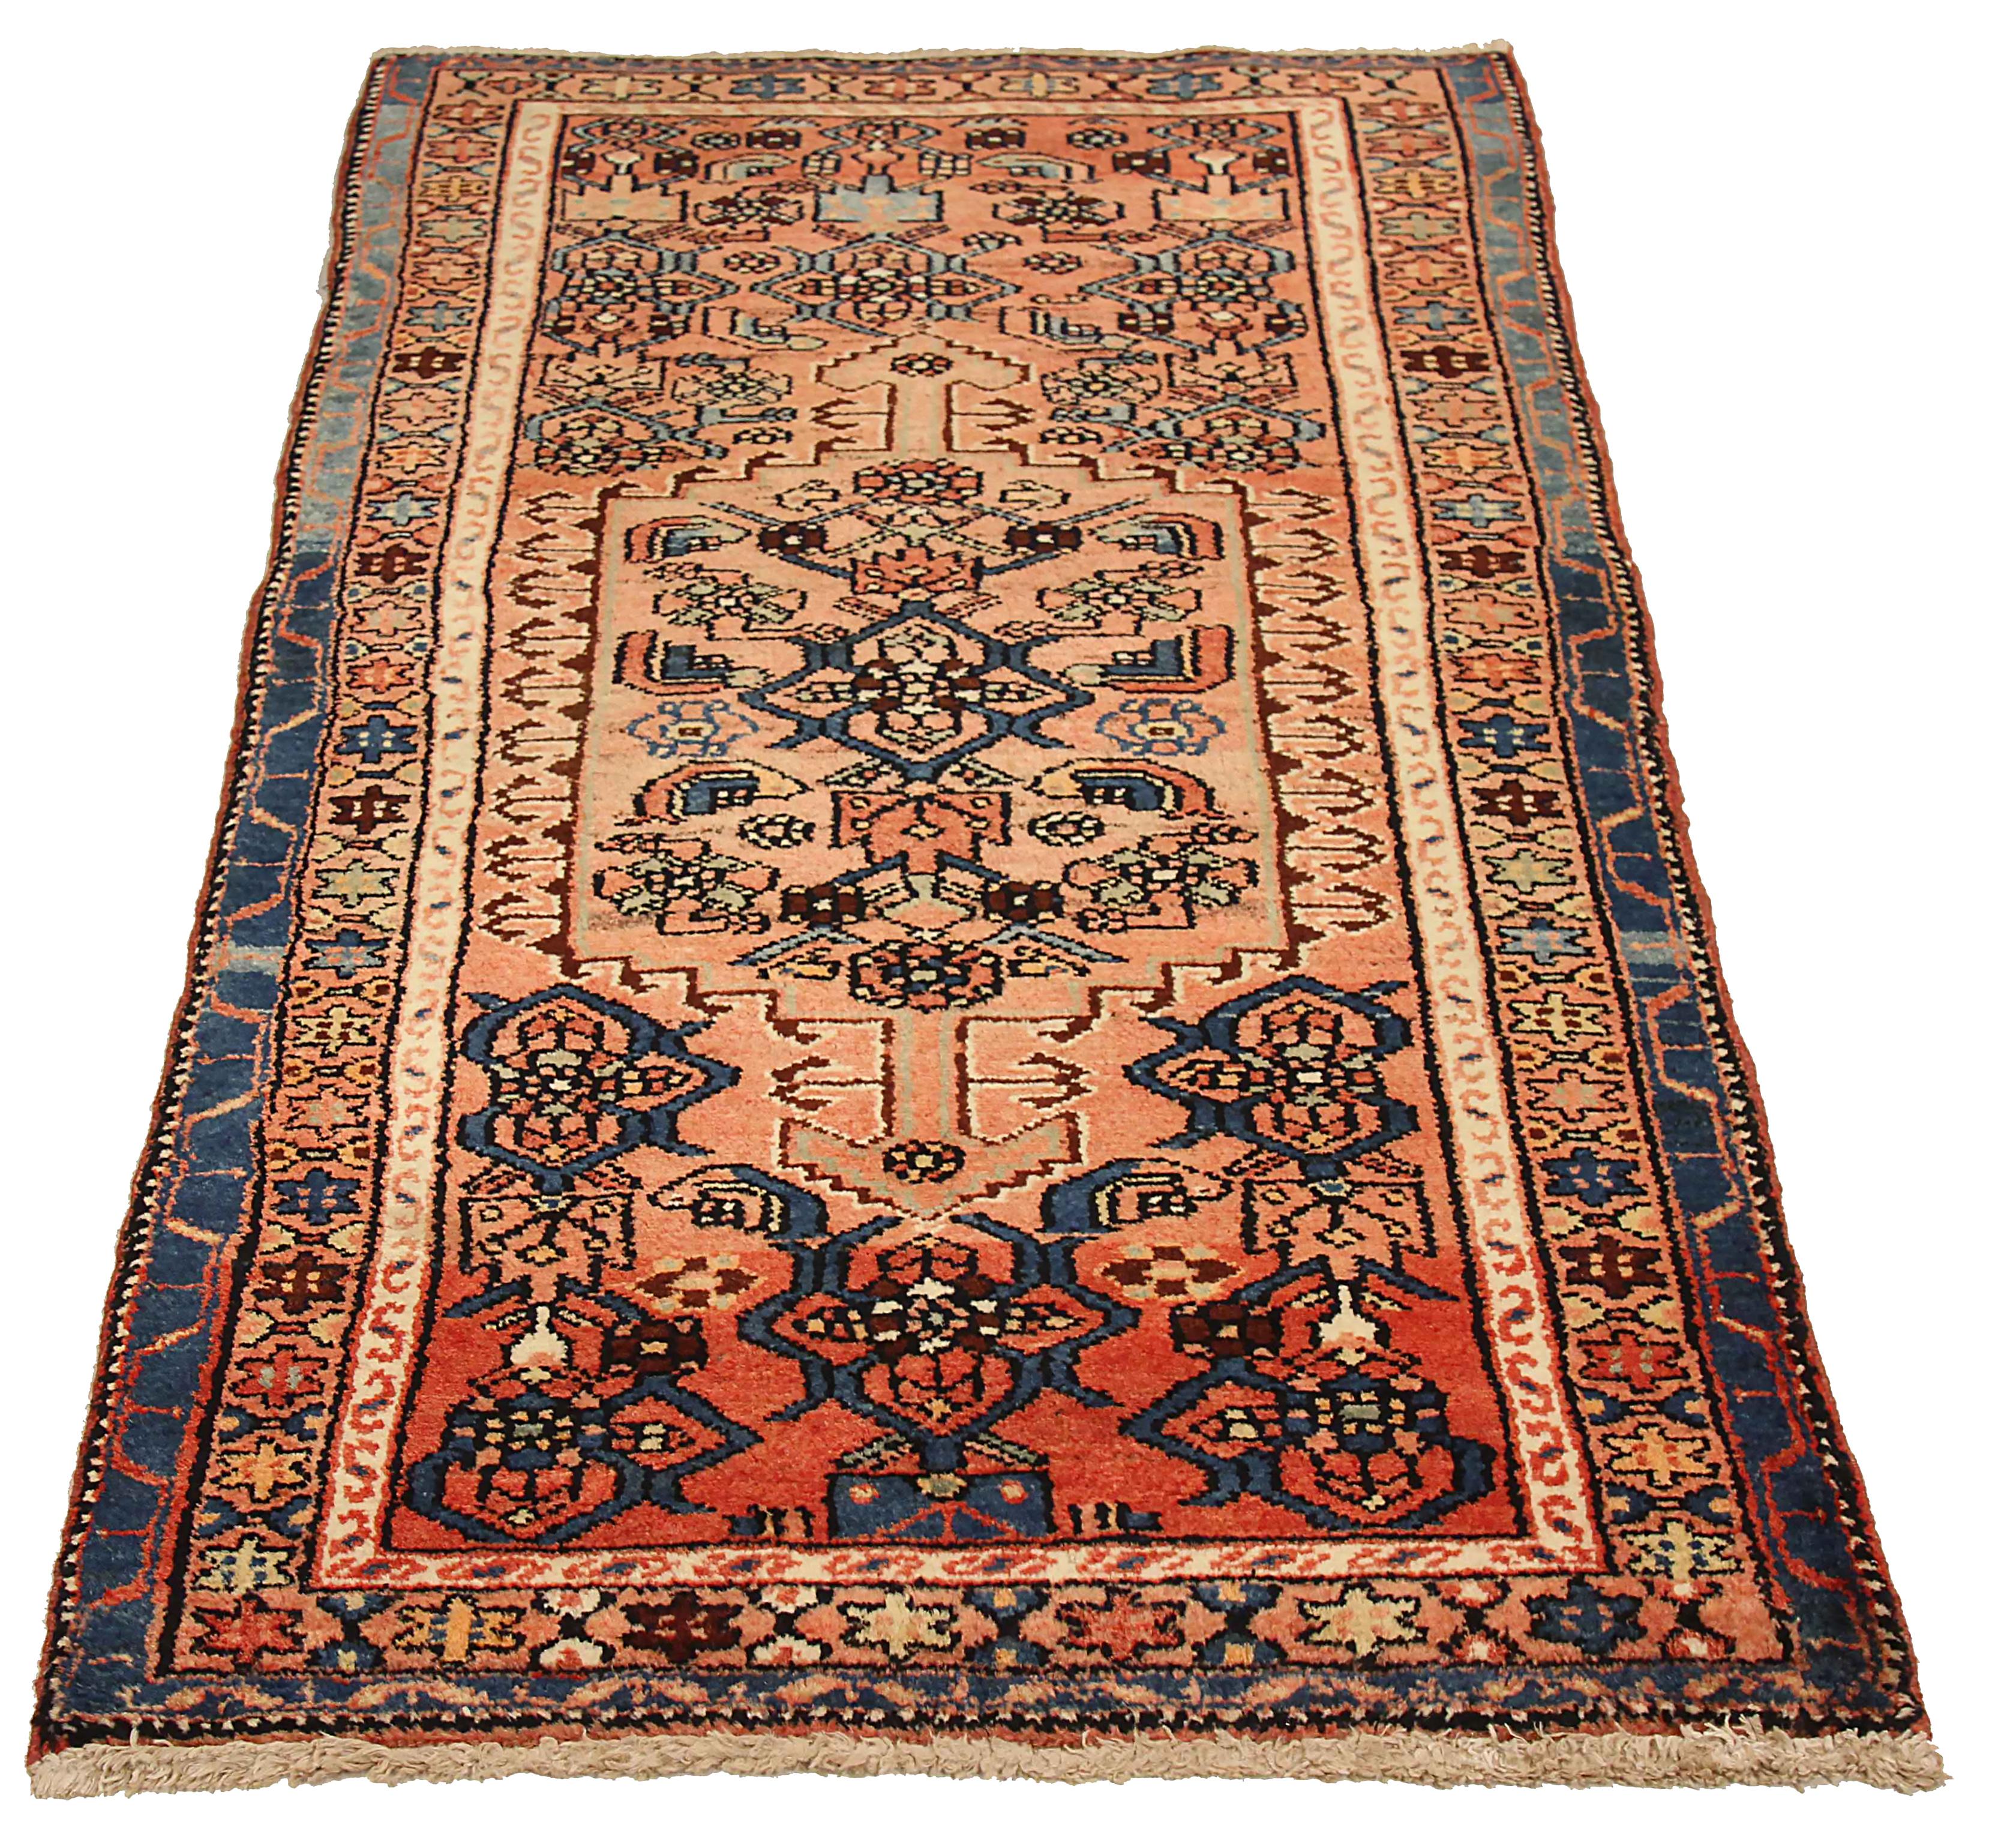 Antique Persian area rug handwoven from the finest sheep’s wool. It’s colored with all-natural vegetable dyes that are safe for humans and pets. It’s a traditional Zanjan design handwoven by expert artisans. It’s a lovely area rug that can be